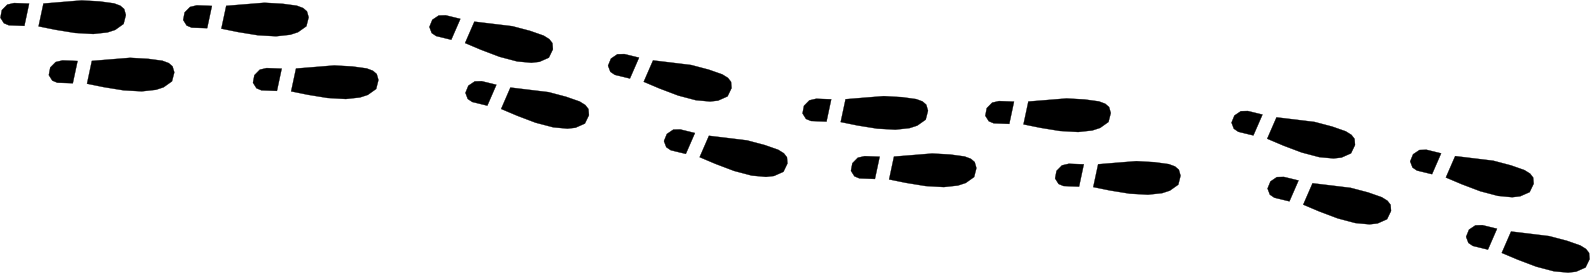 Mystery clipart footstep. Footsteps feb dec 